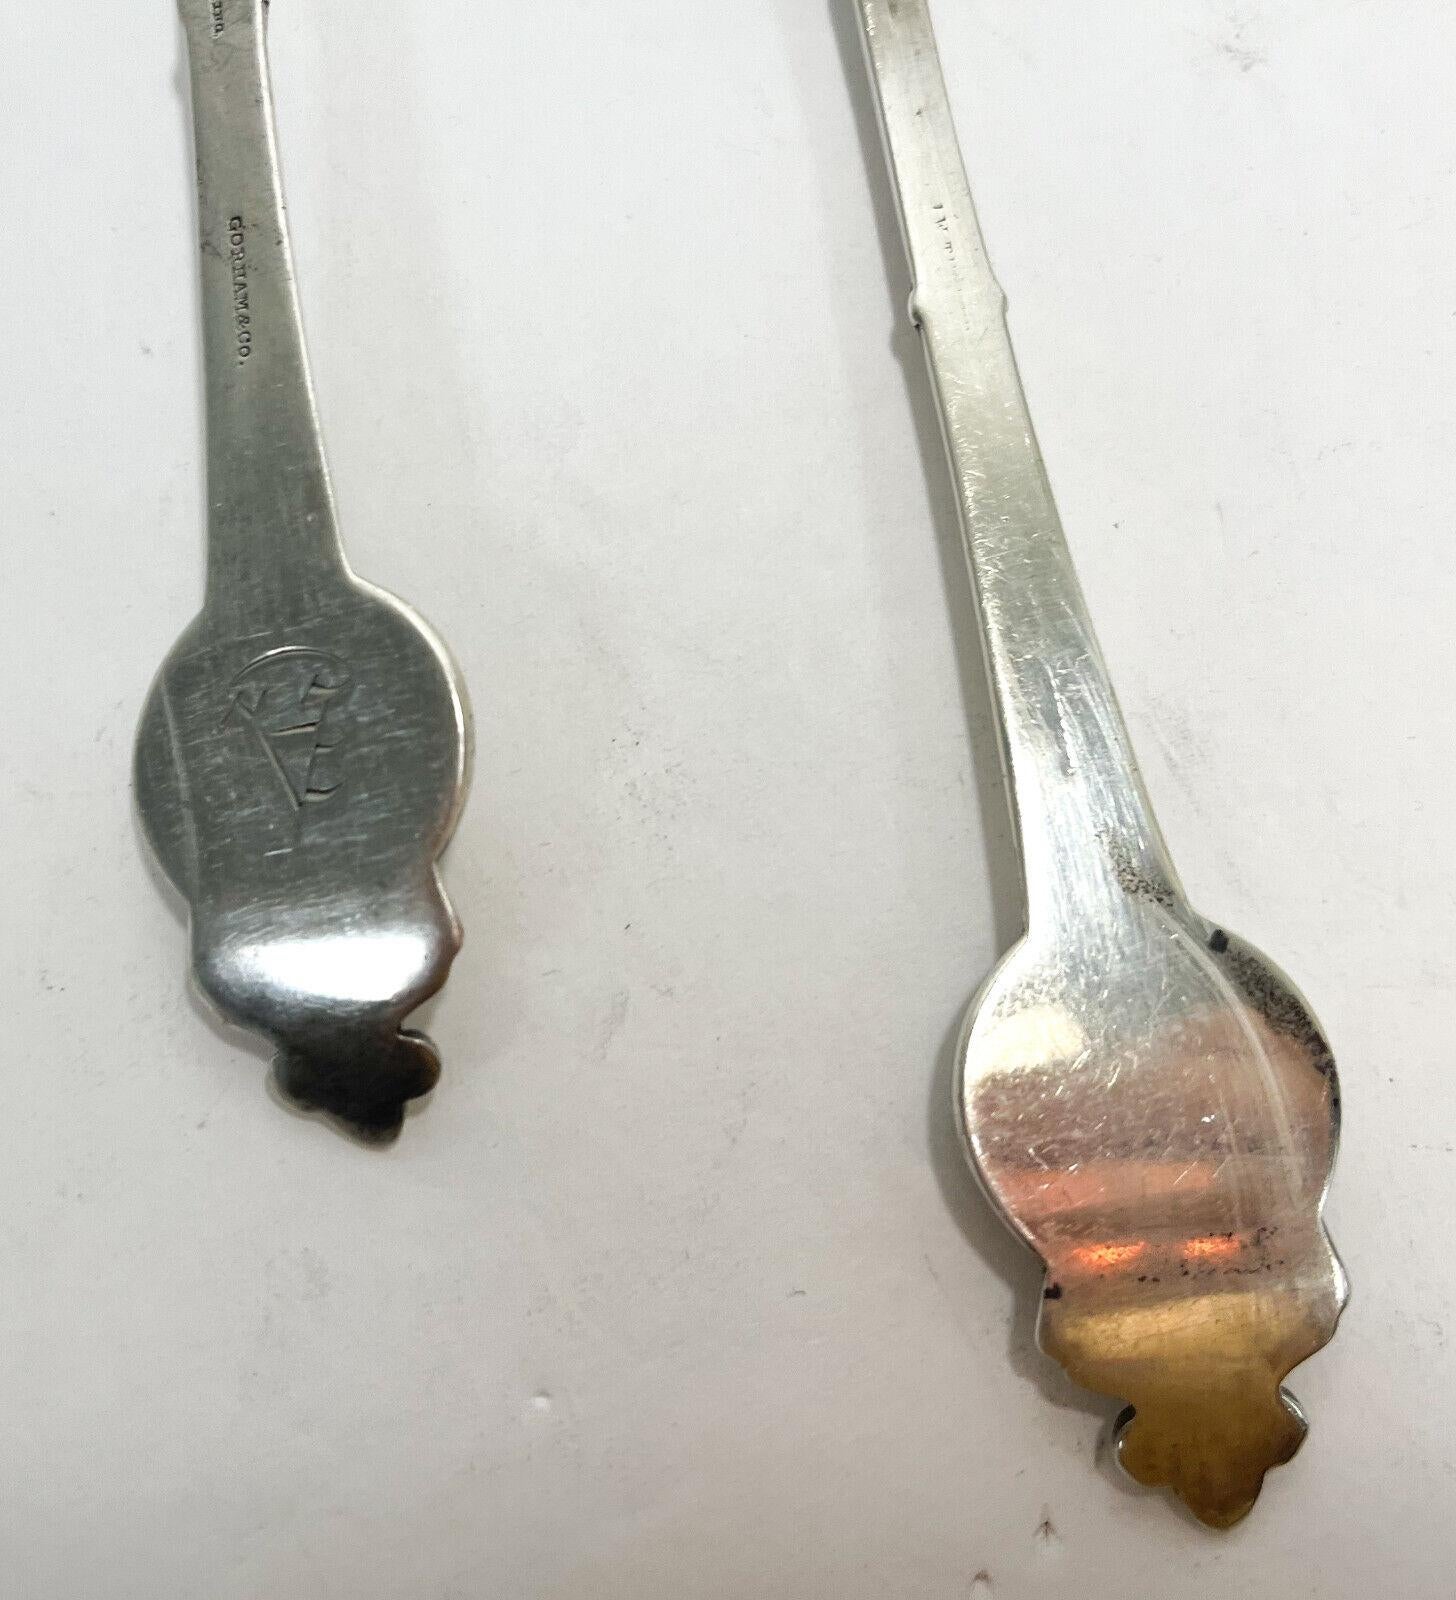  7 Gorham Sterling Silver Medallion 8.5 inch Tablespoons, Late 19th Century  3